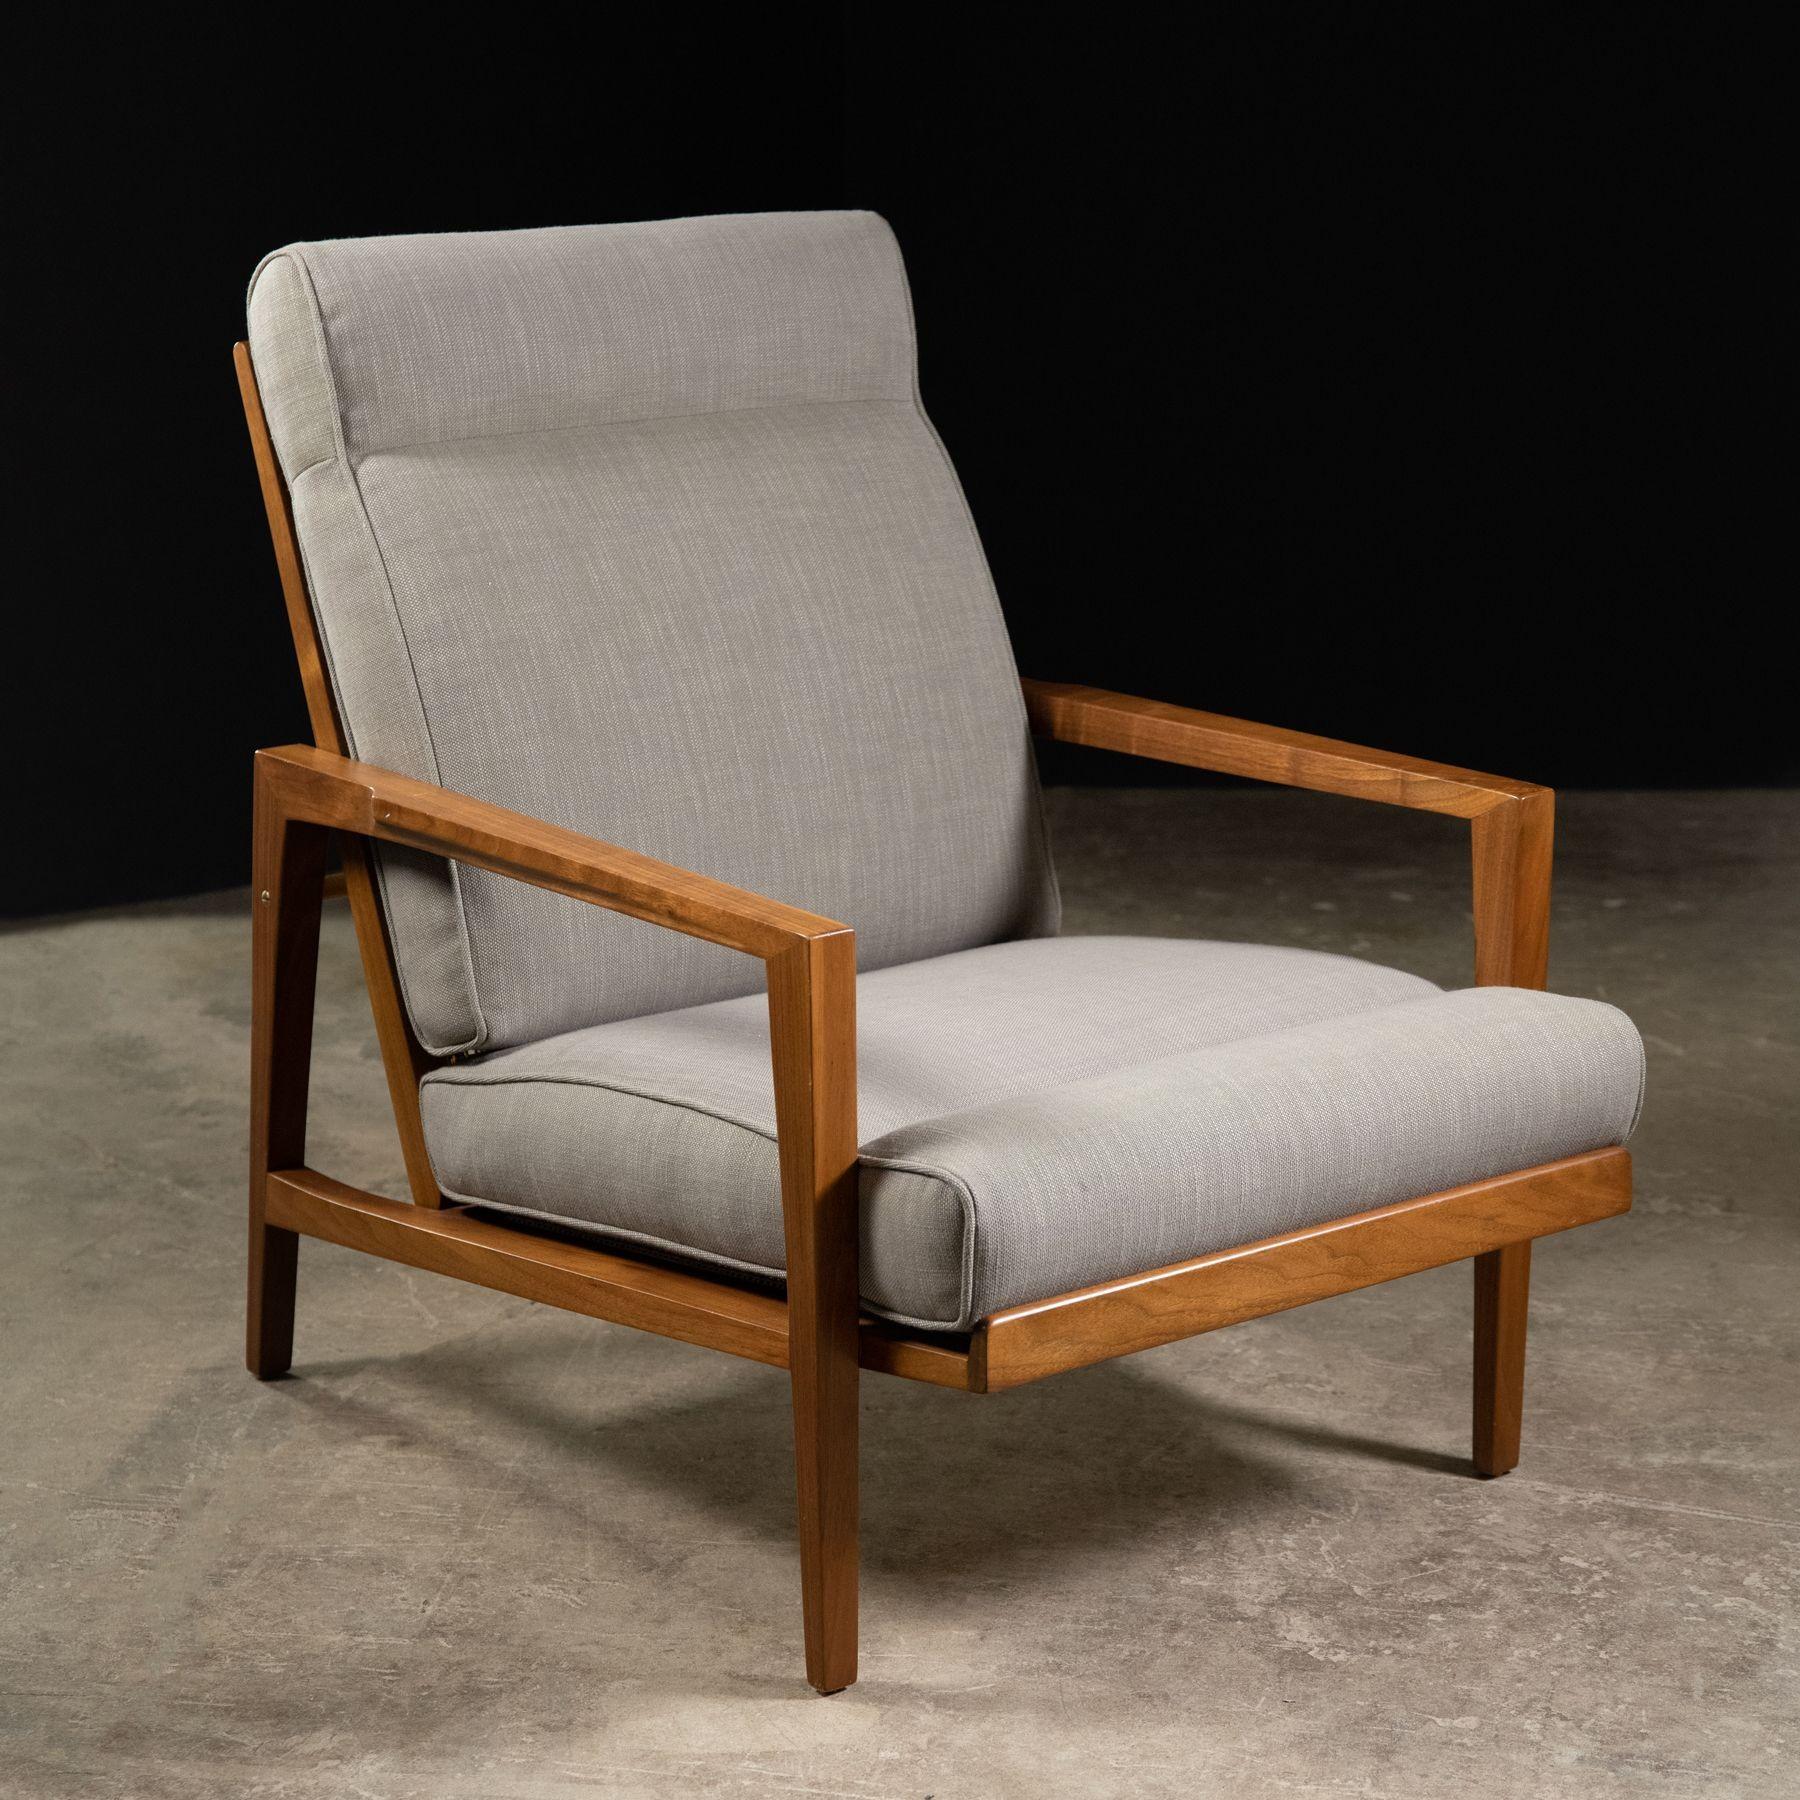 This elegant lounge chair was designed by Edward Wormley for Dunbar in the late 1960s and was only produced for a very short time. The frame is crafted from solid American claro walnut with sculpted armrests and tapering legs. The back and seat